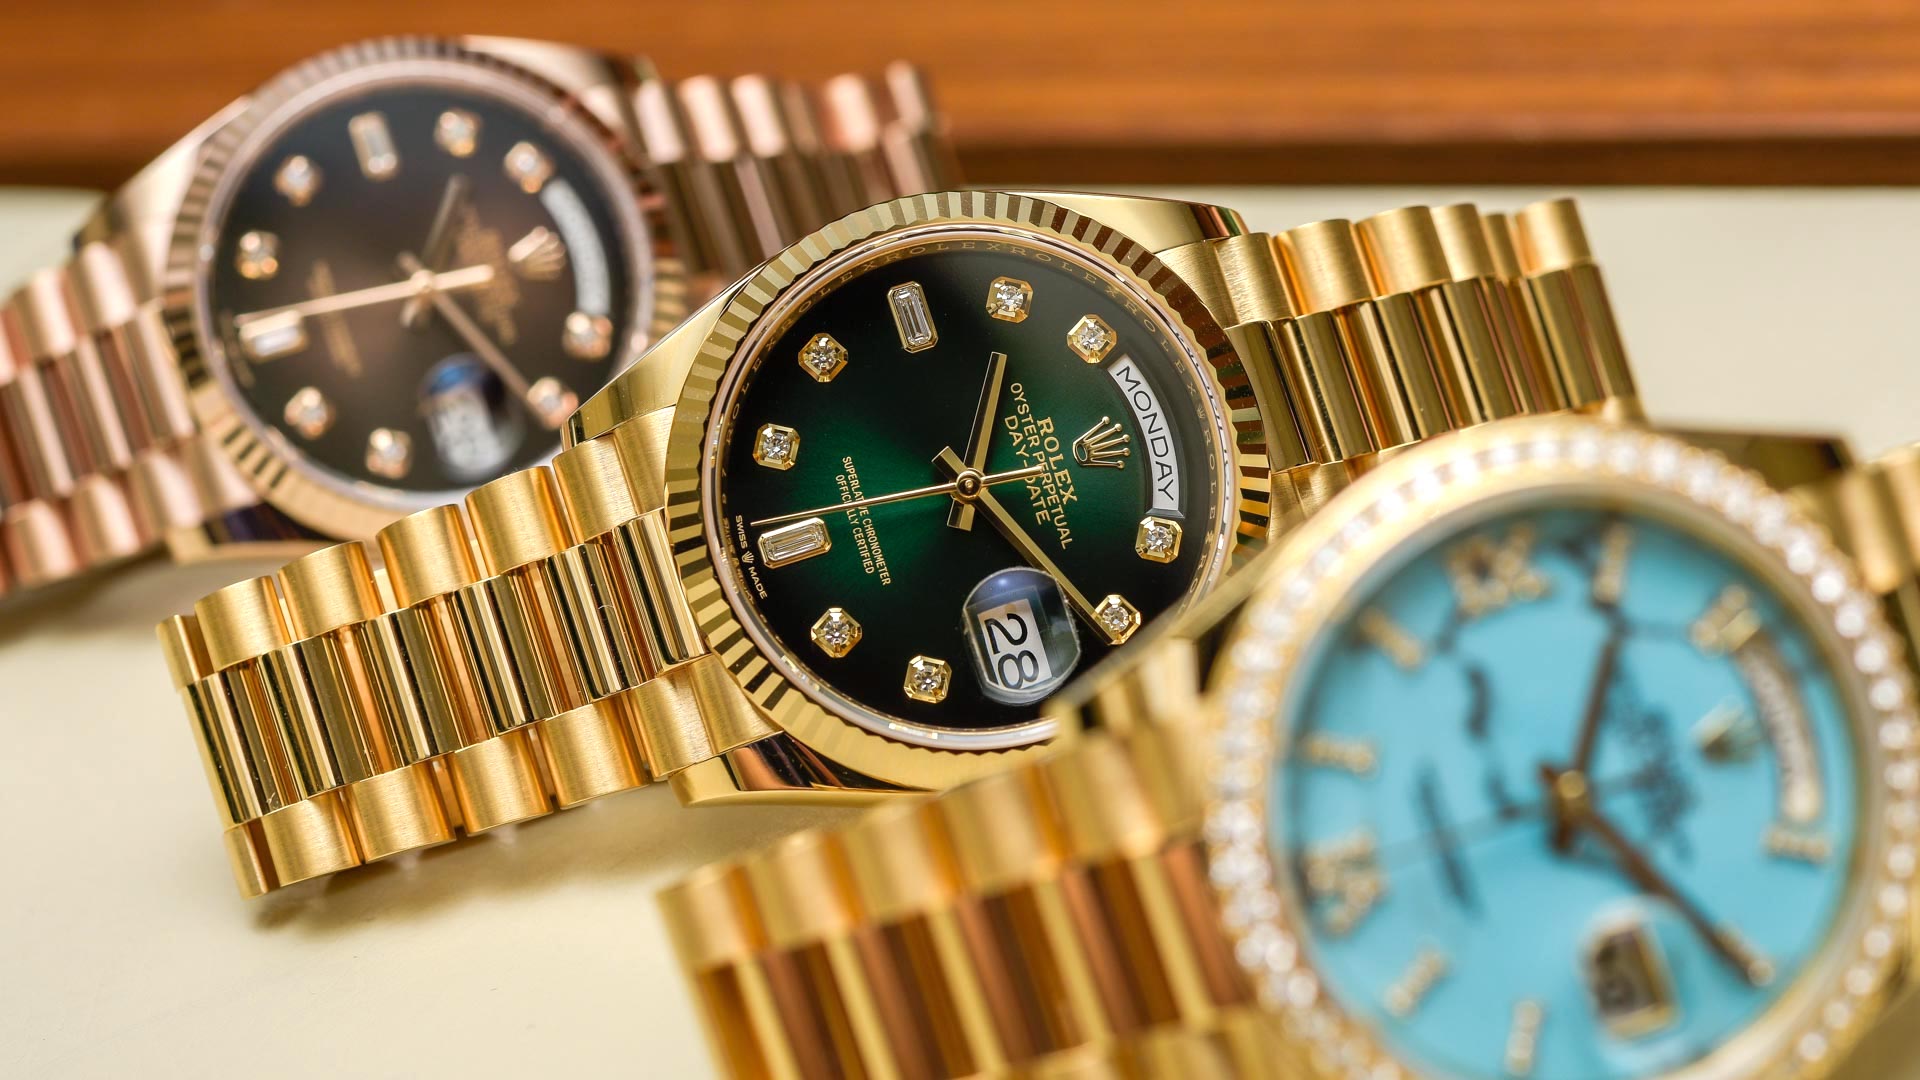 Updated Rolex Day-Date 36 Watches For 